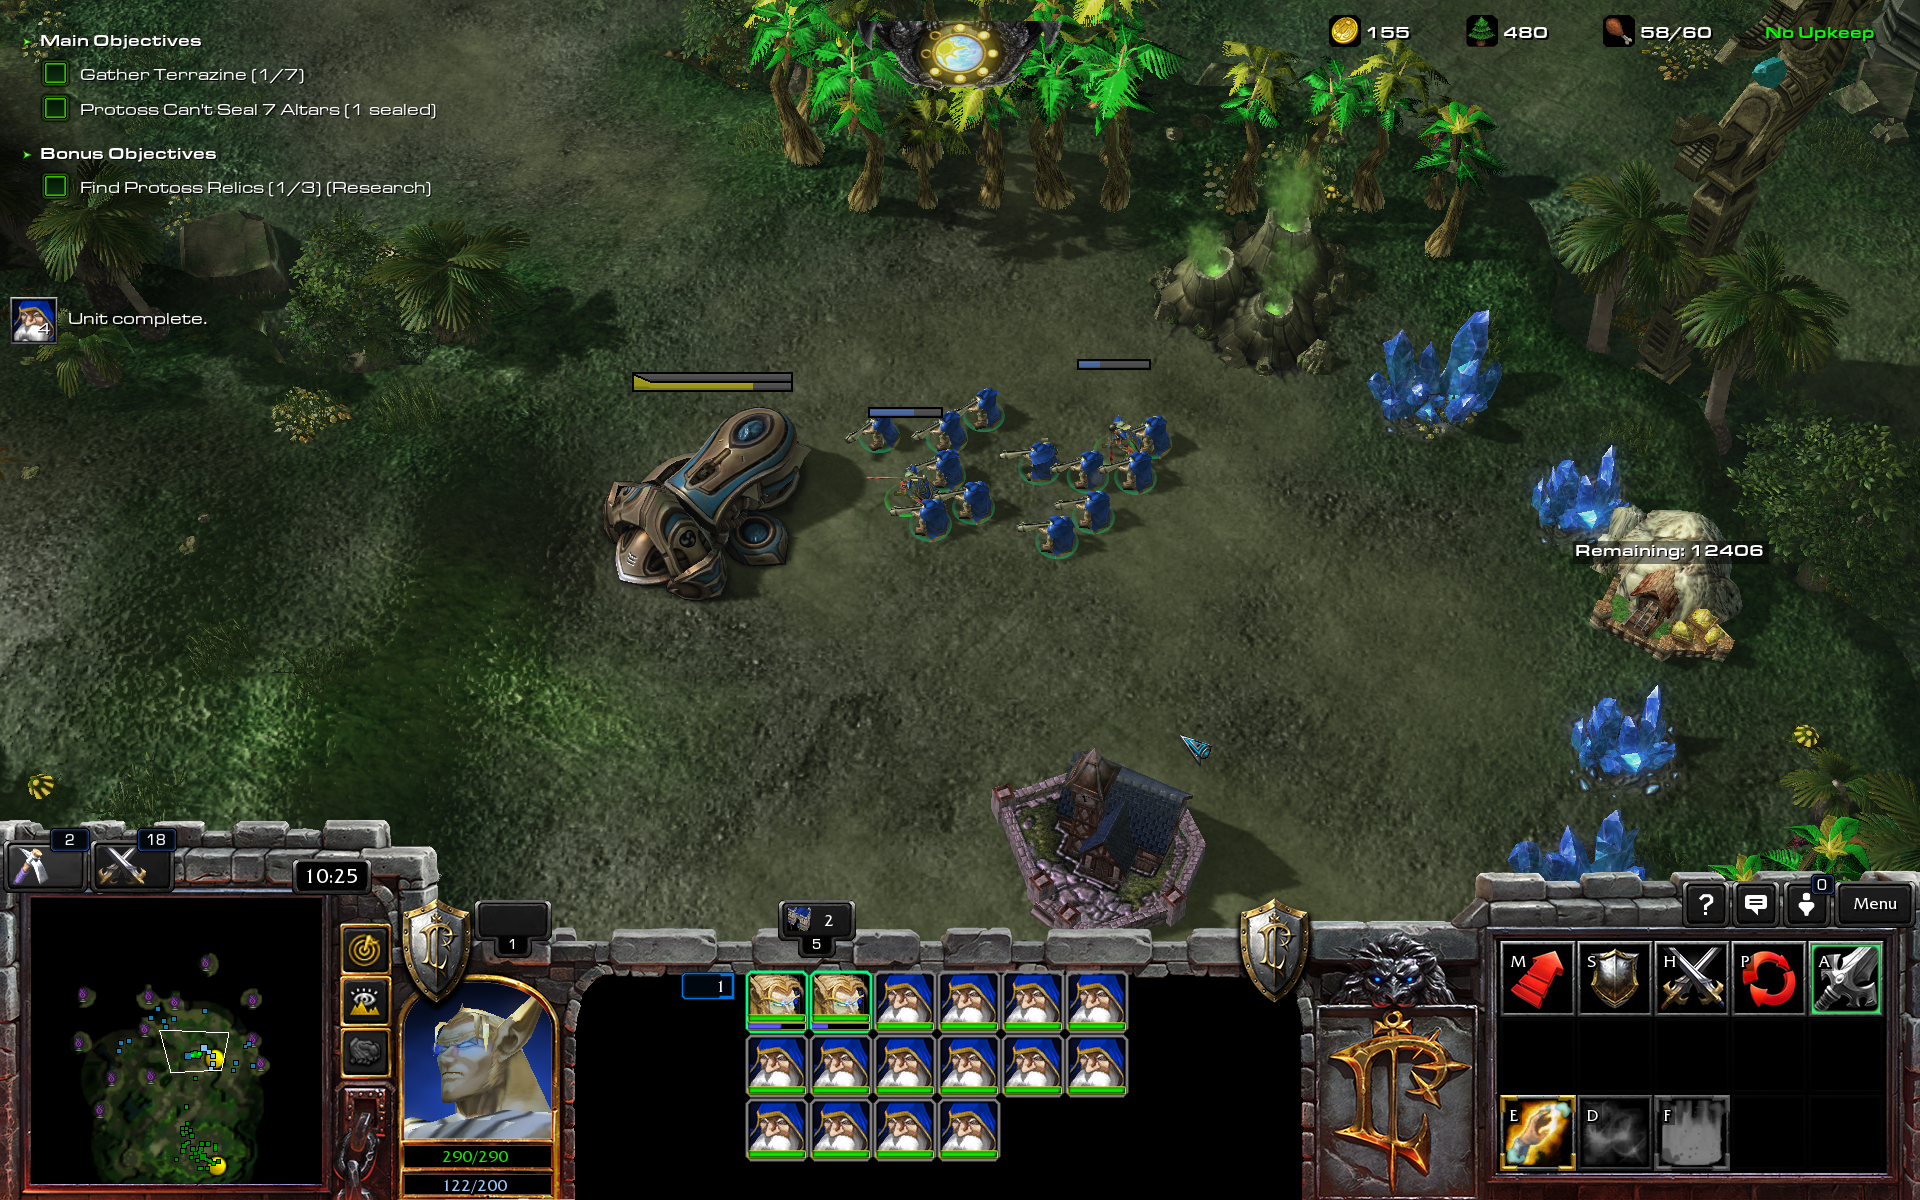 Download CurseForge free for PC, Mac - CCM